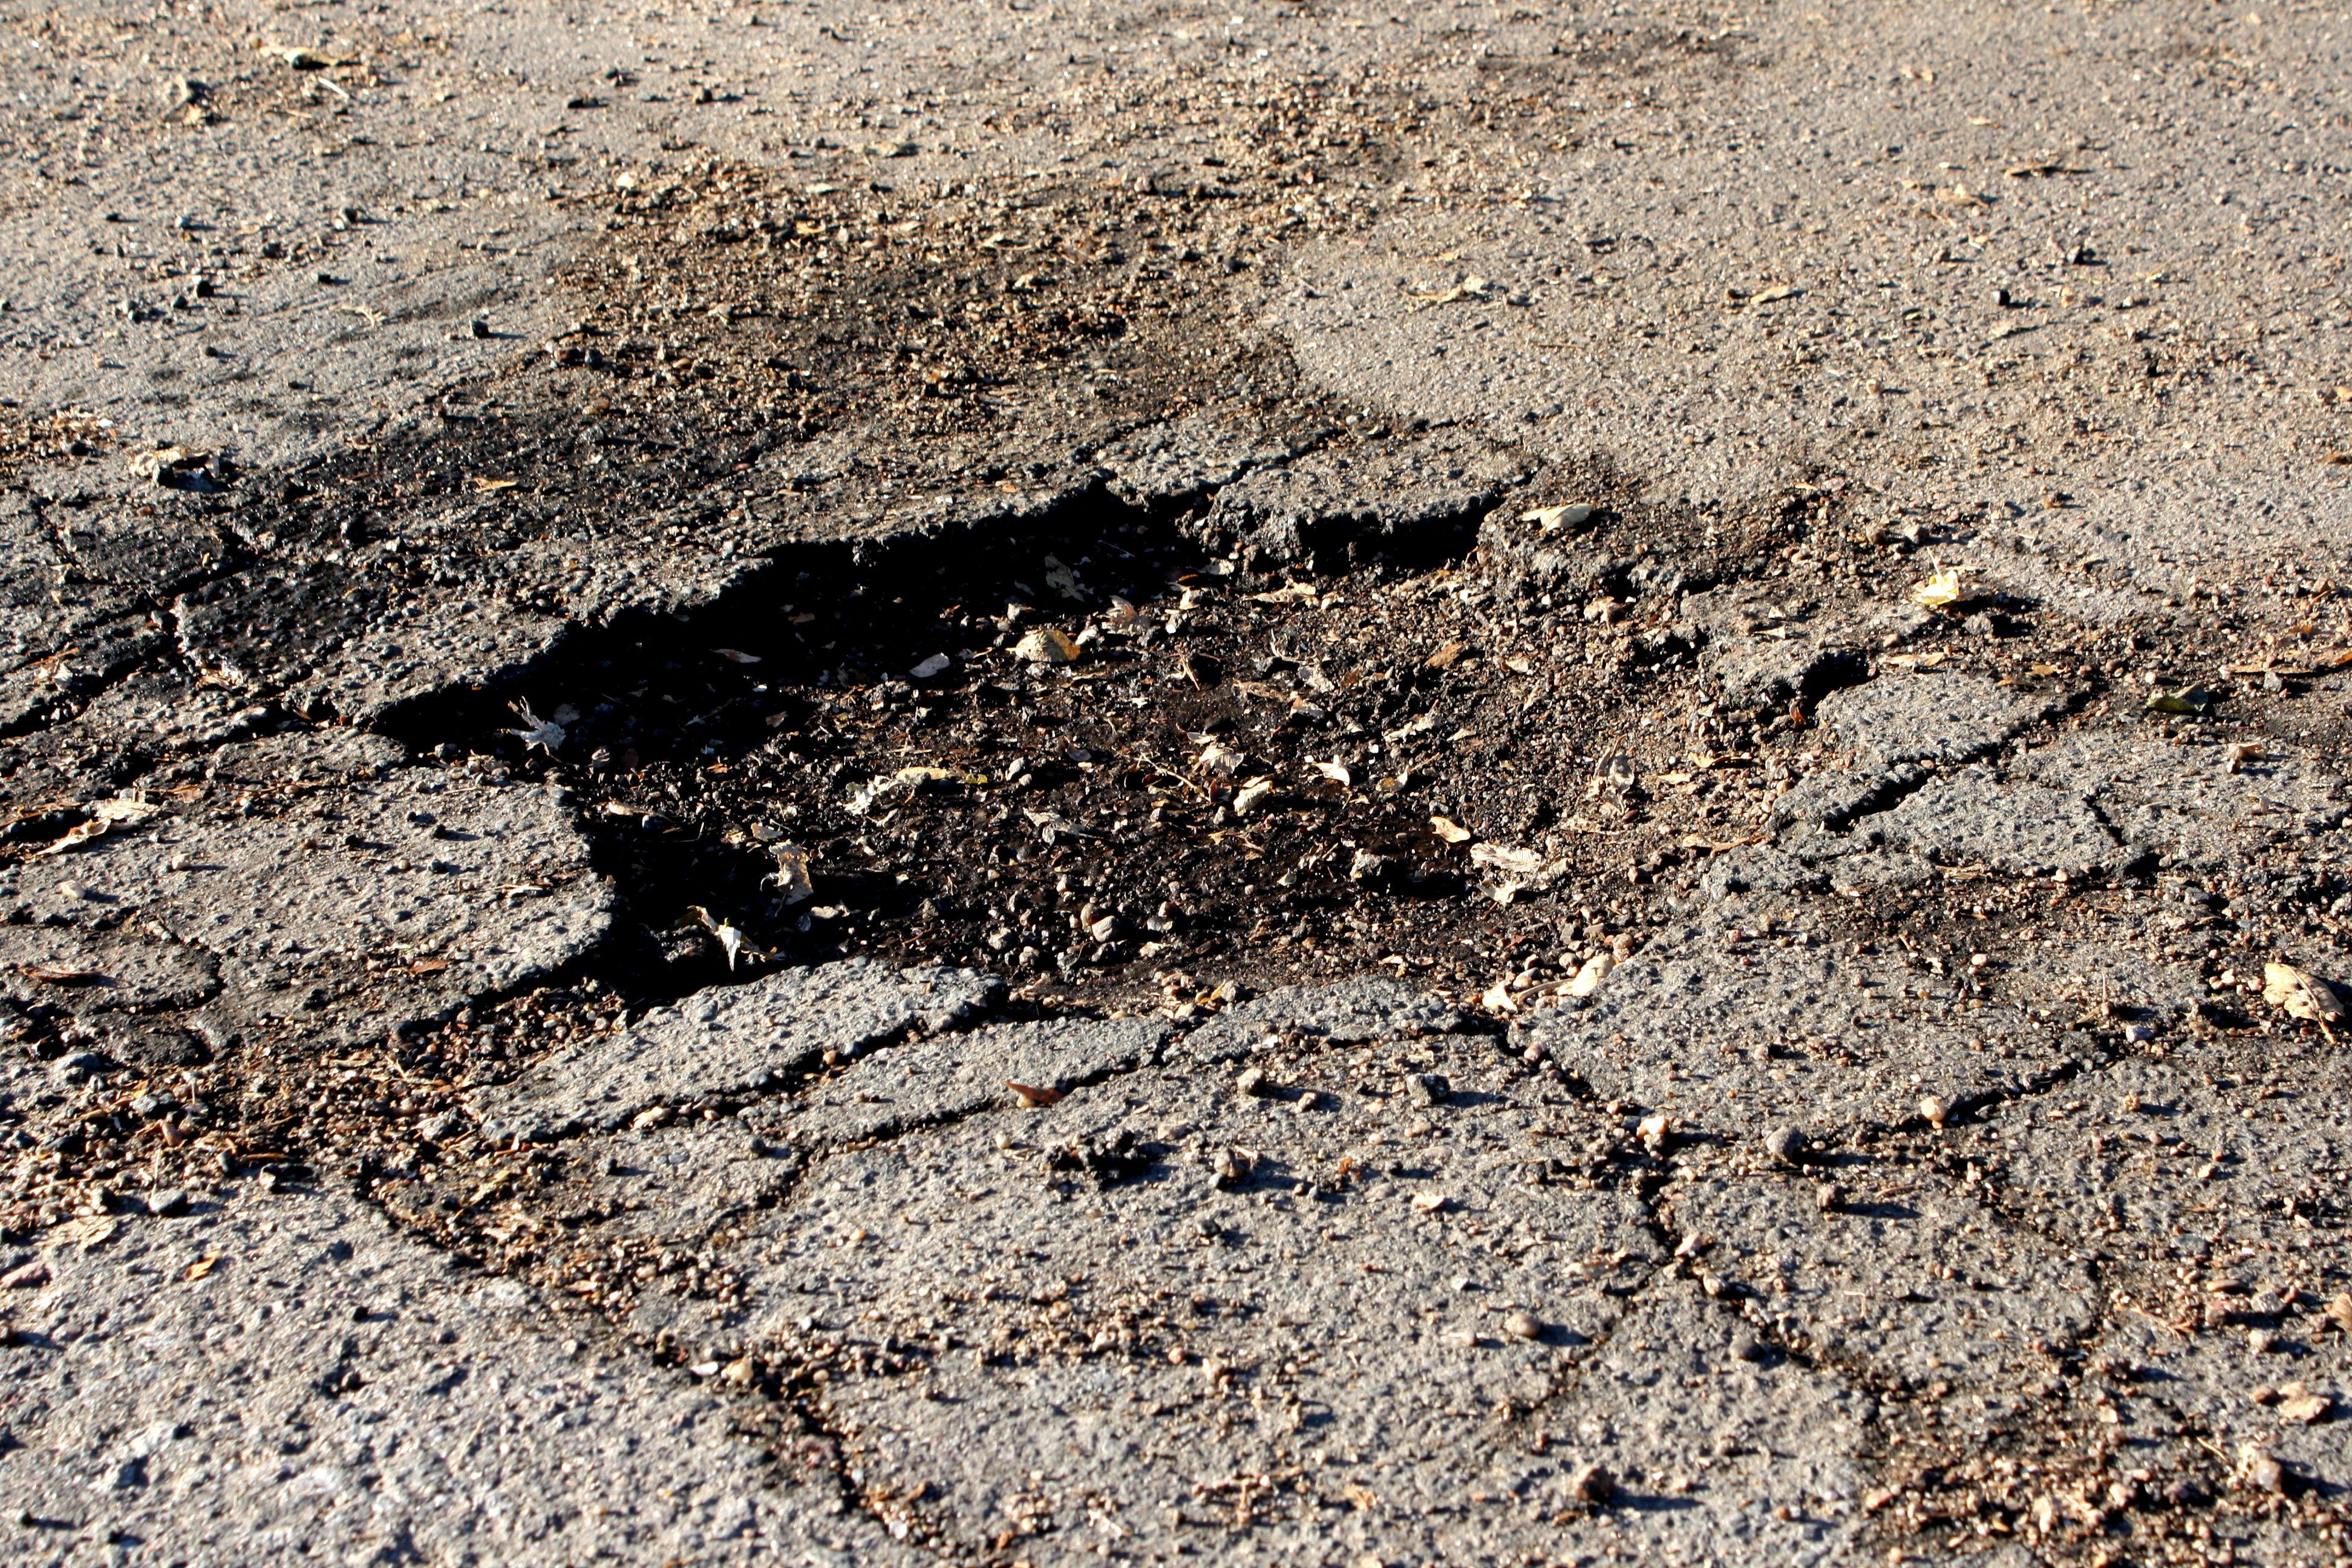 Pothole in the Road Picture | Free Photograph | Photos ...